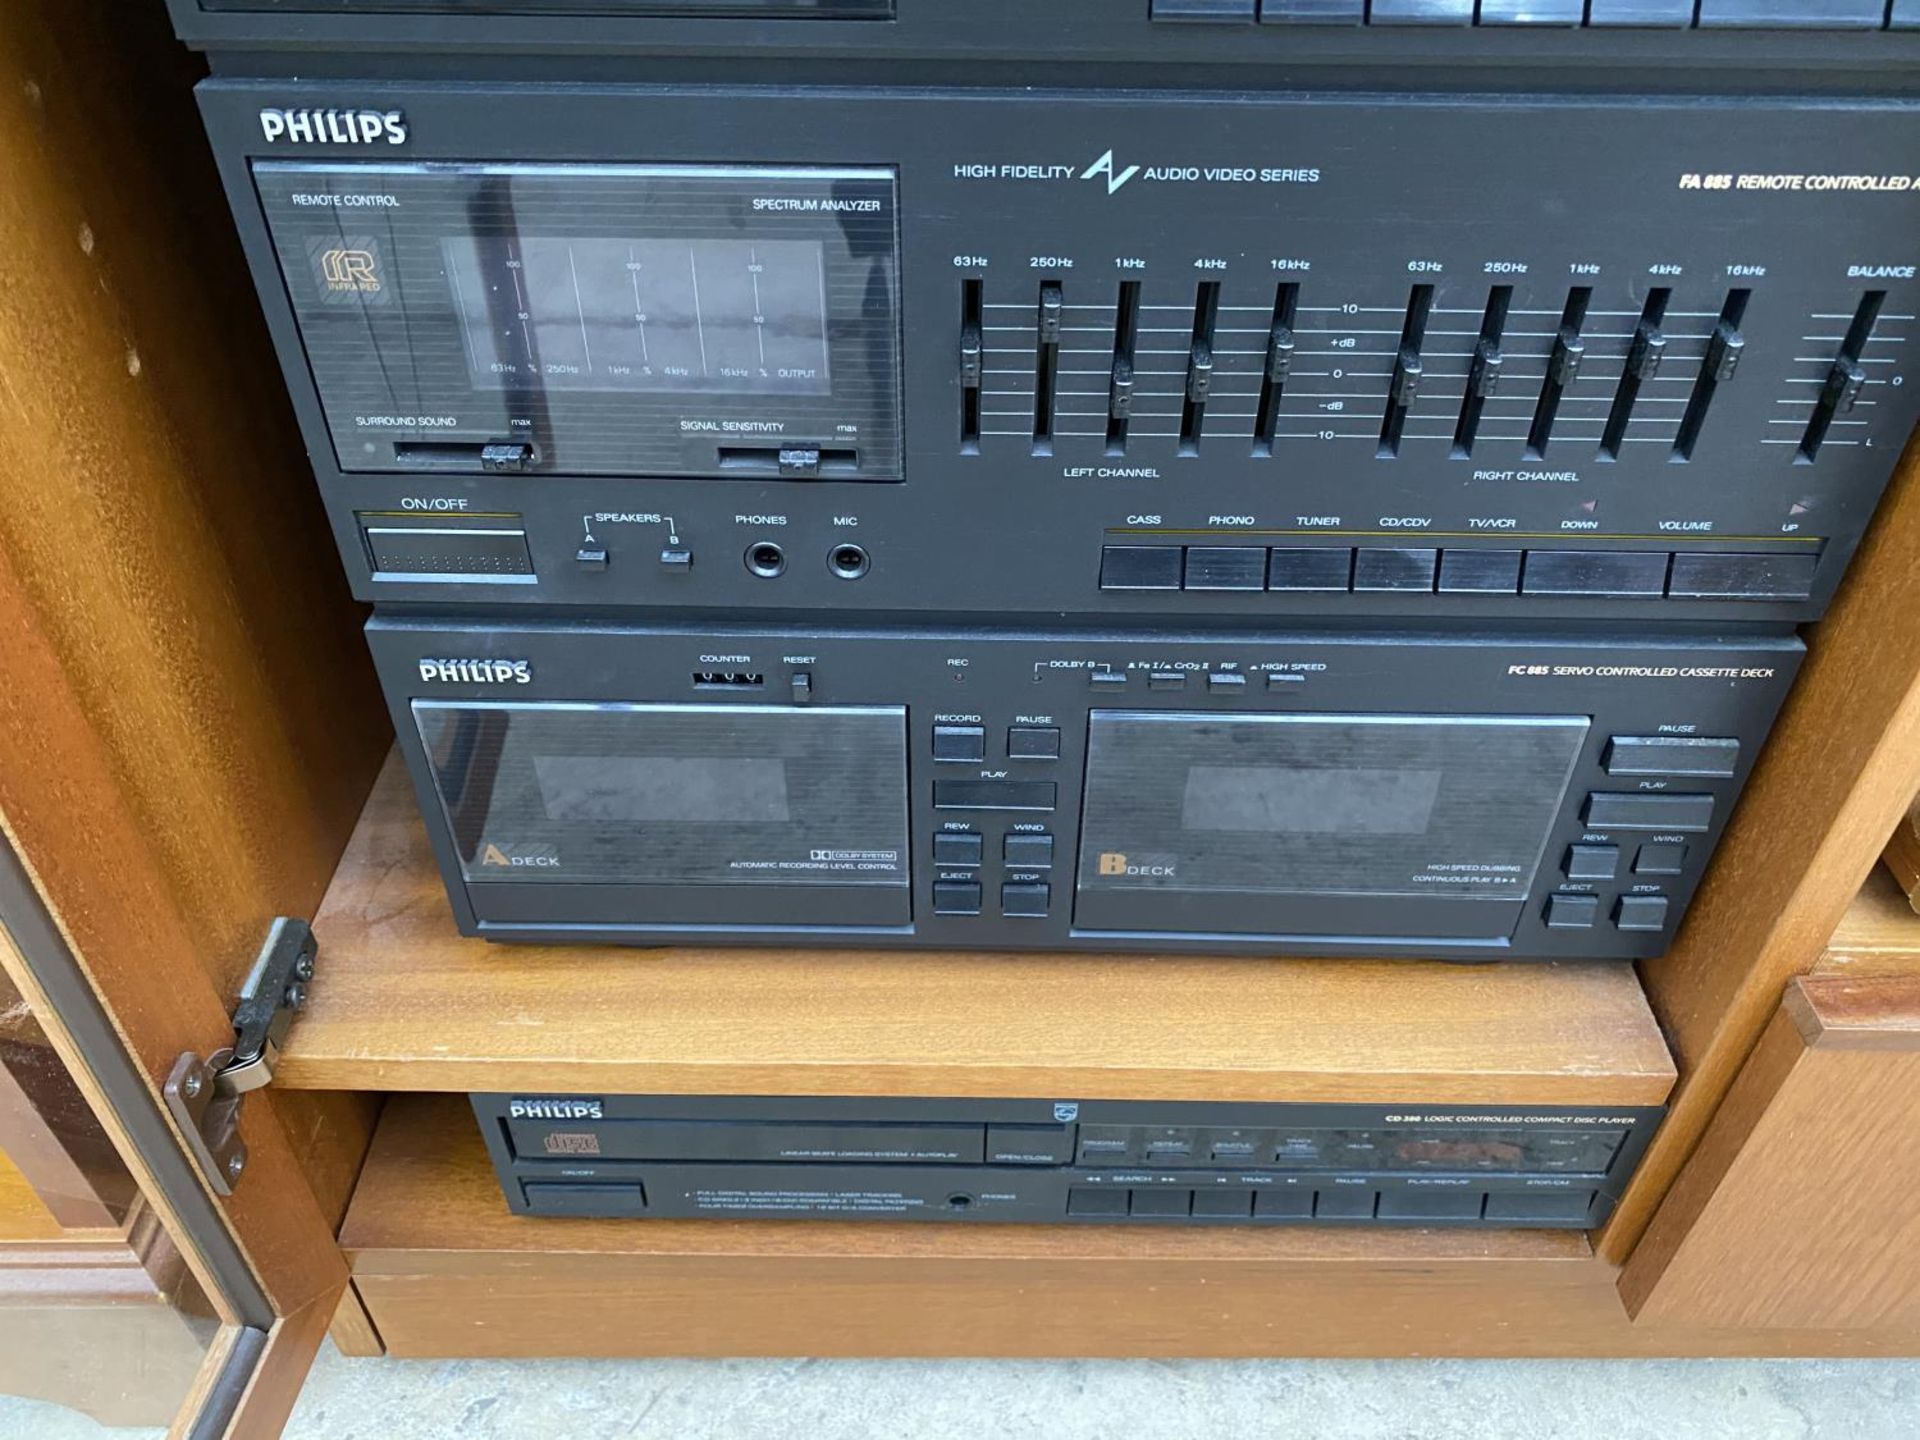 A TEAK STEREO CABINET CONTAINING A PHILIPS STEREO - Image 5 of 5